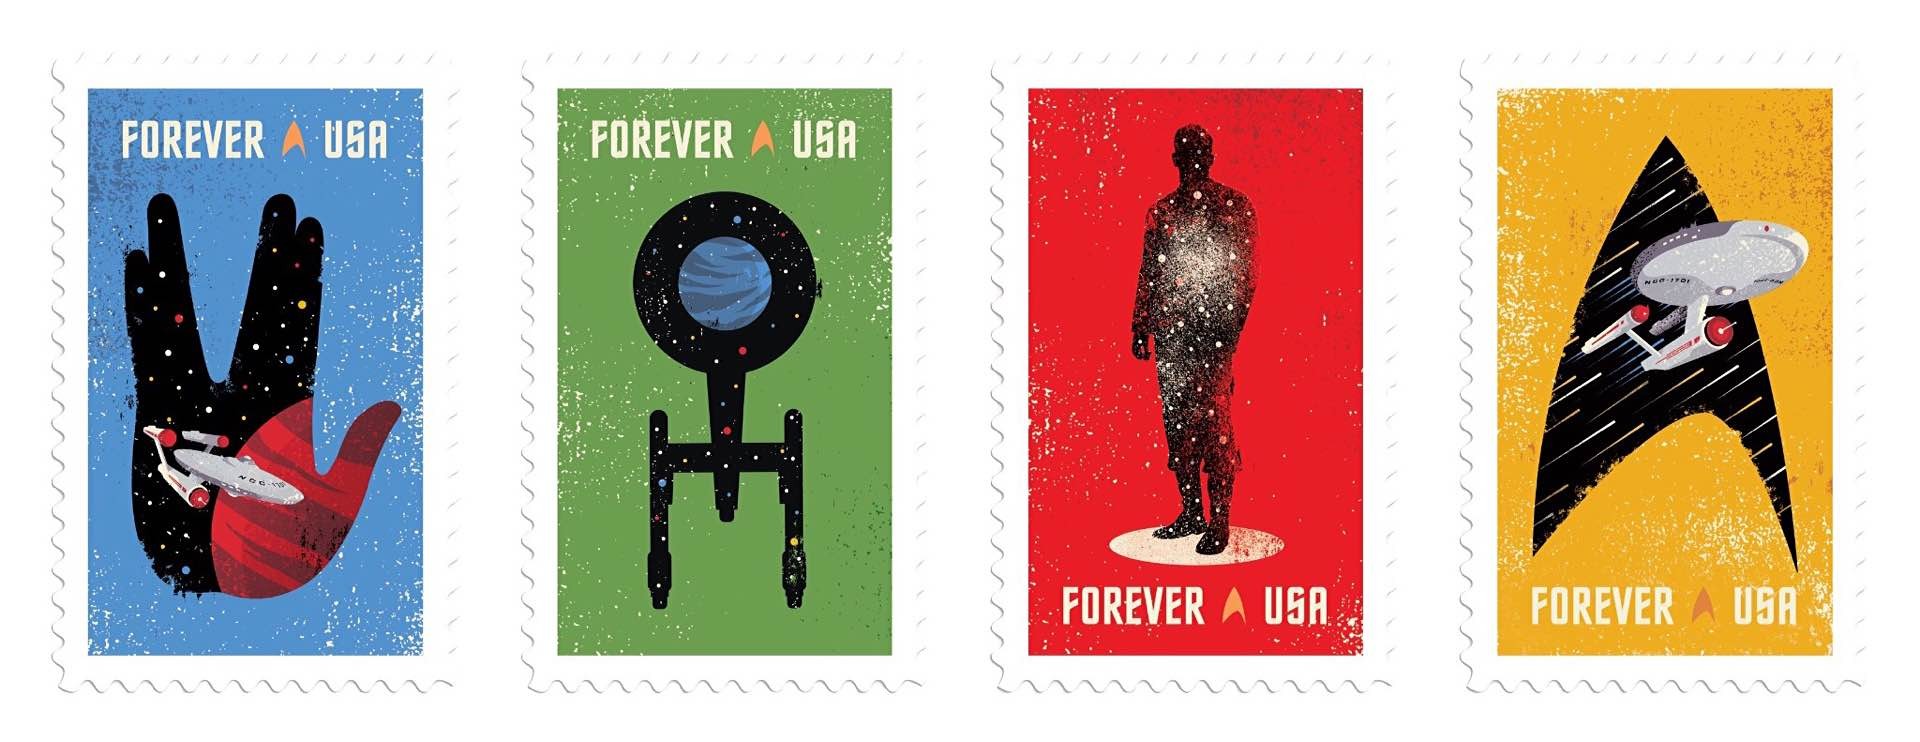 Star Trek 50th anniversary US postage stamps. ($10 for a set of 20)